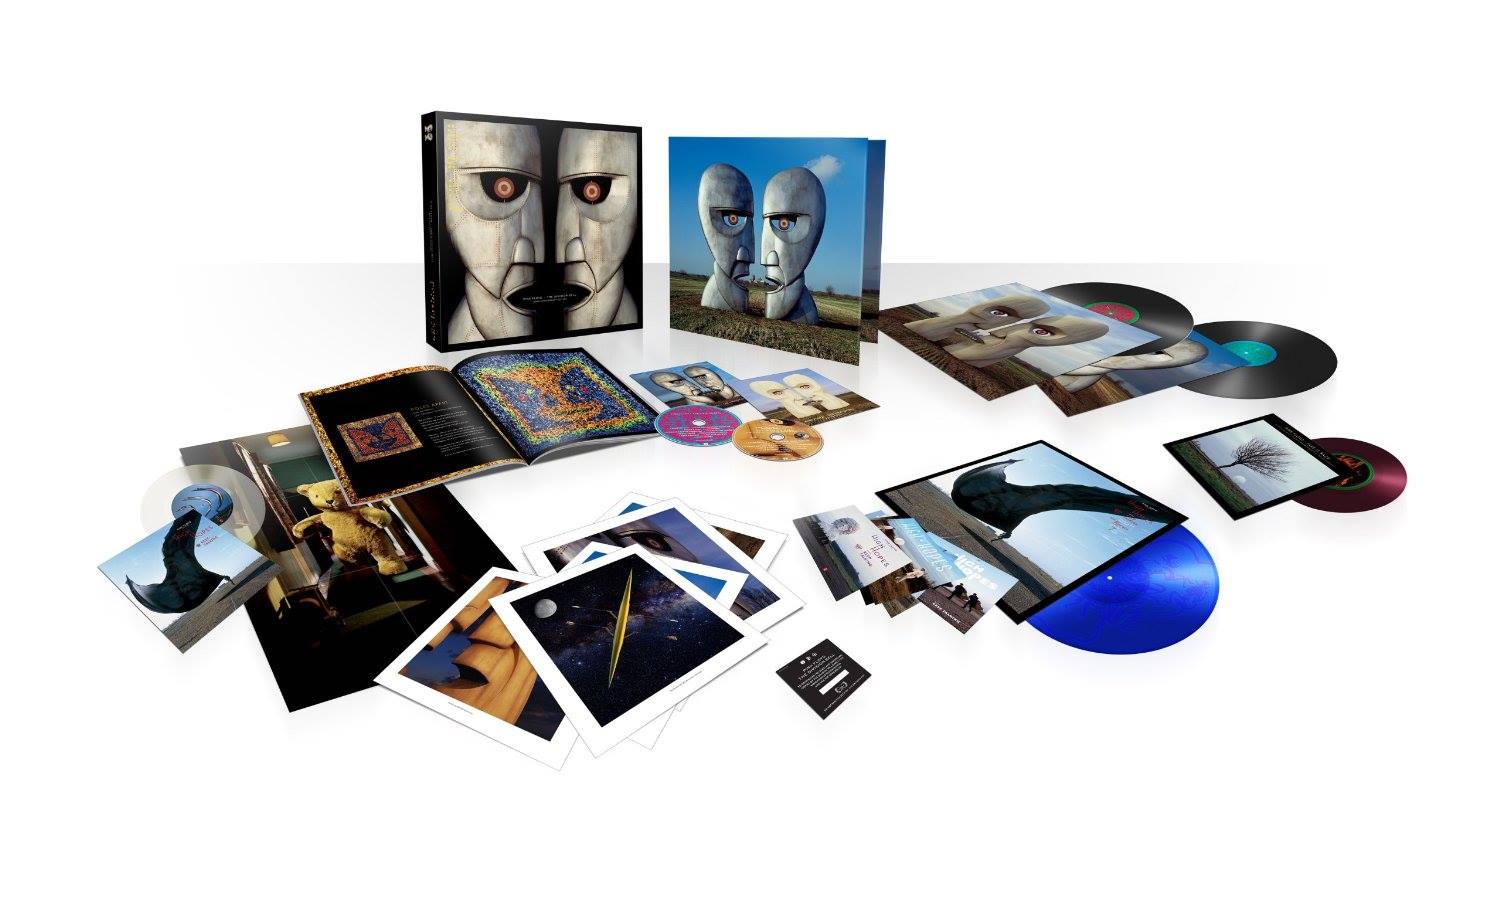 Pink Floyd Division Bell 20th Anniversary Edition Box Set Contents